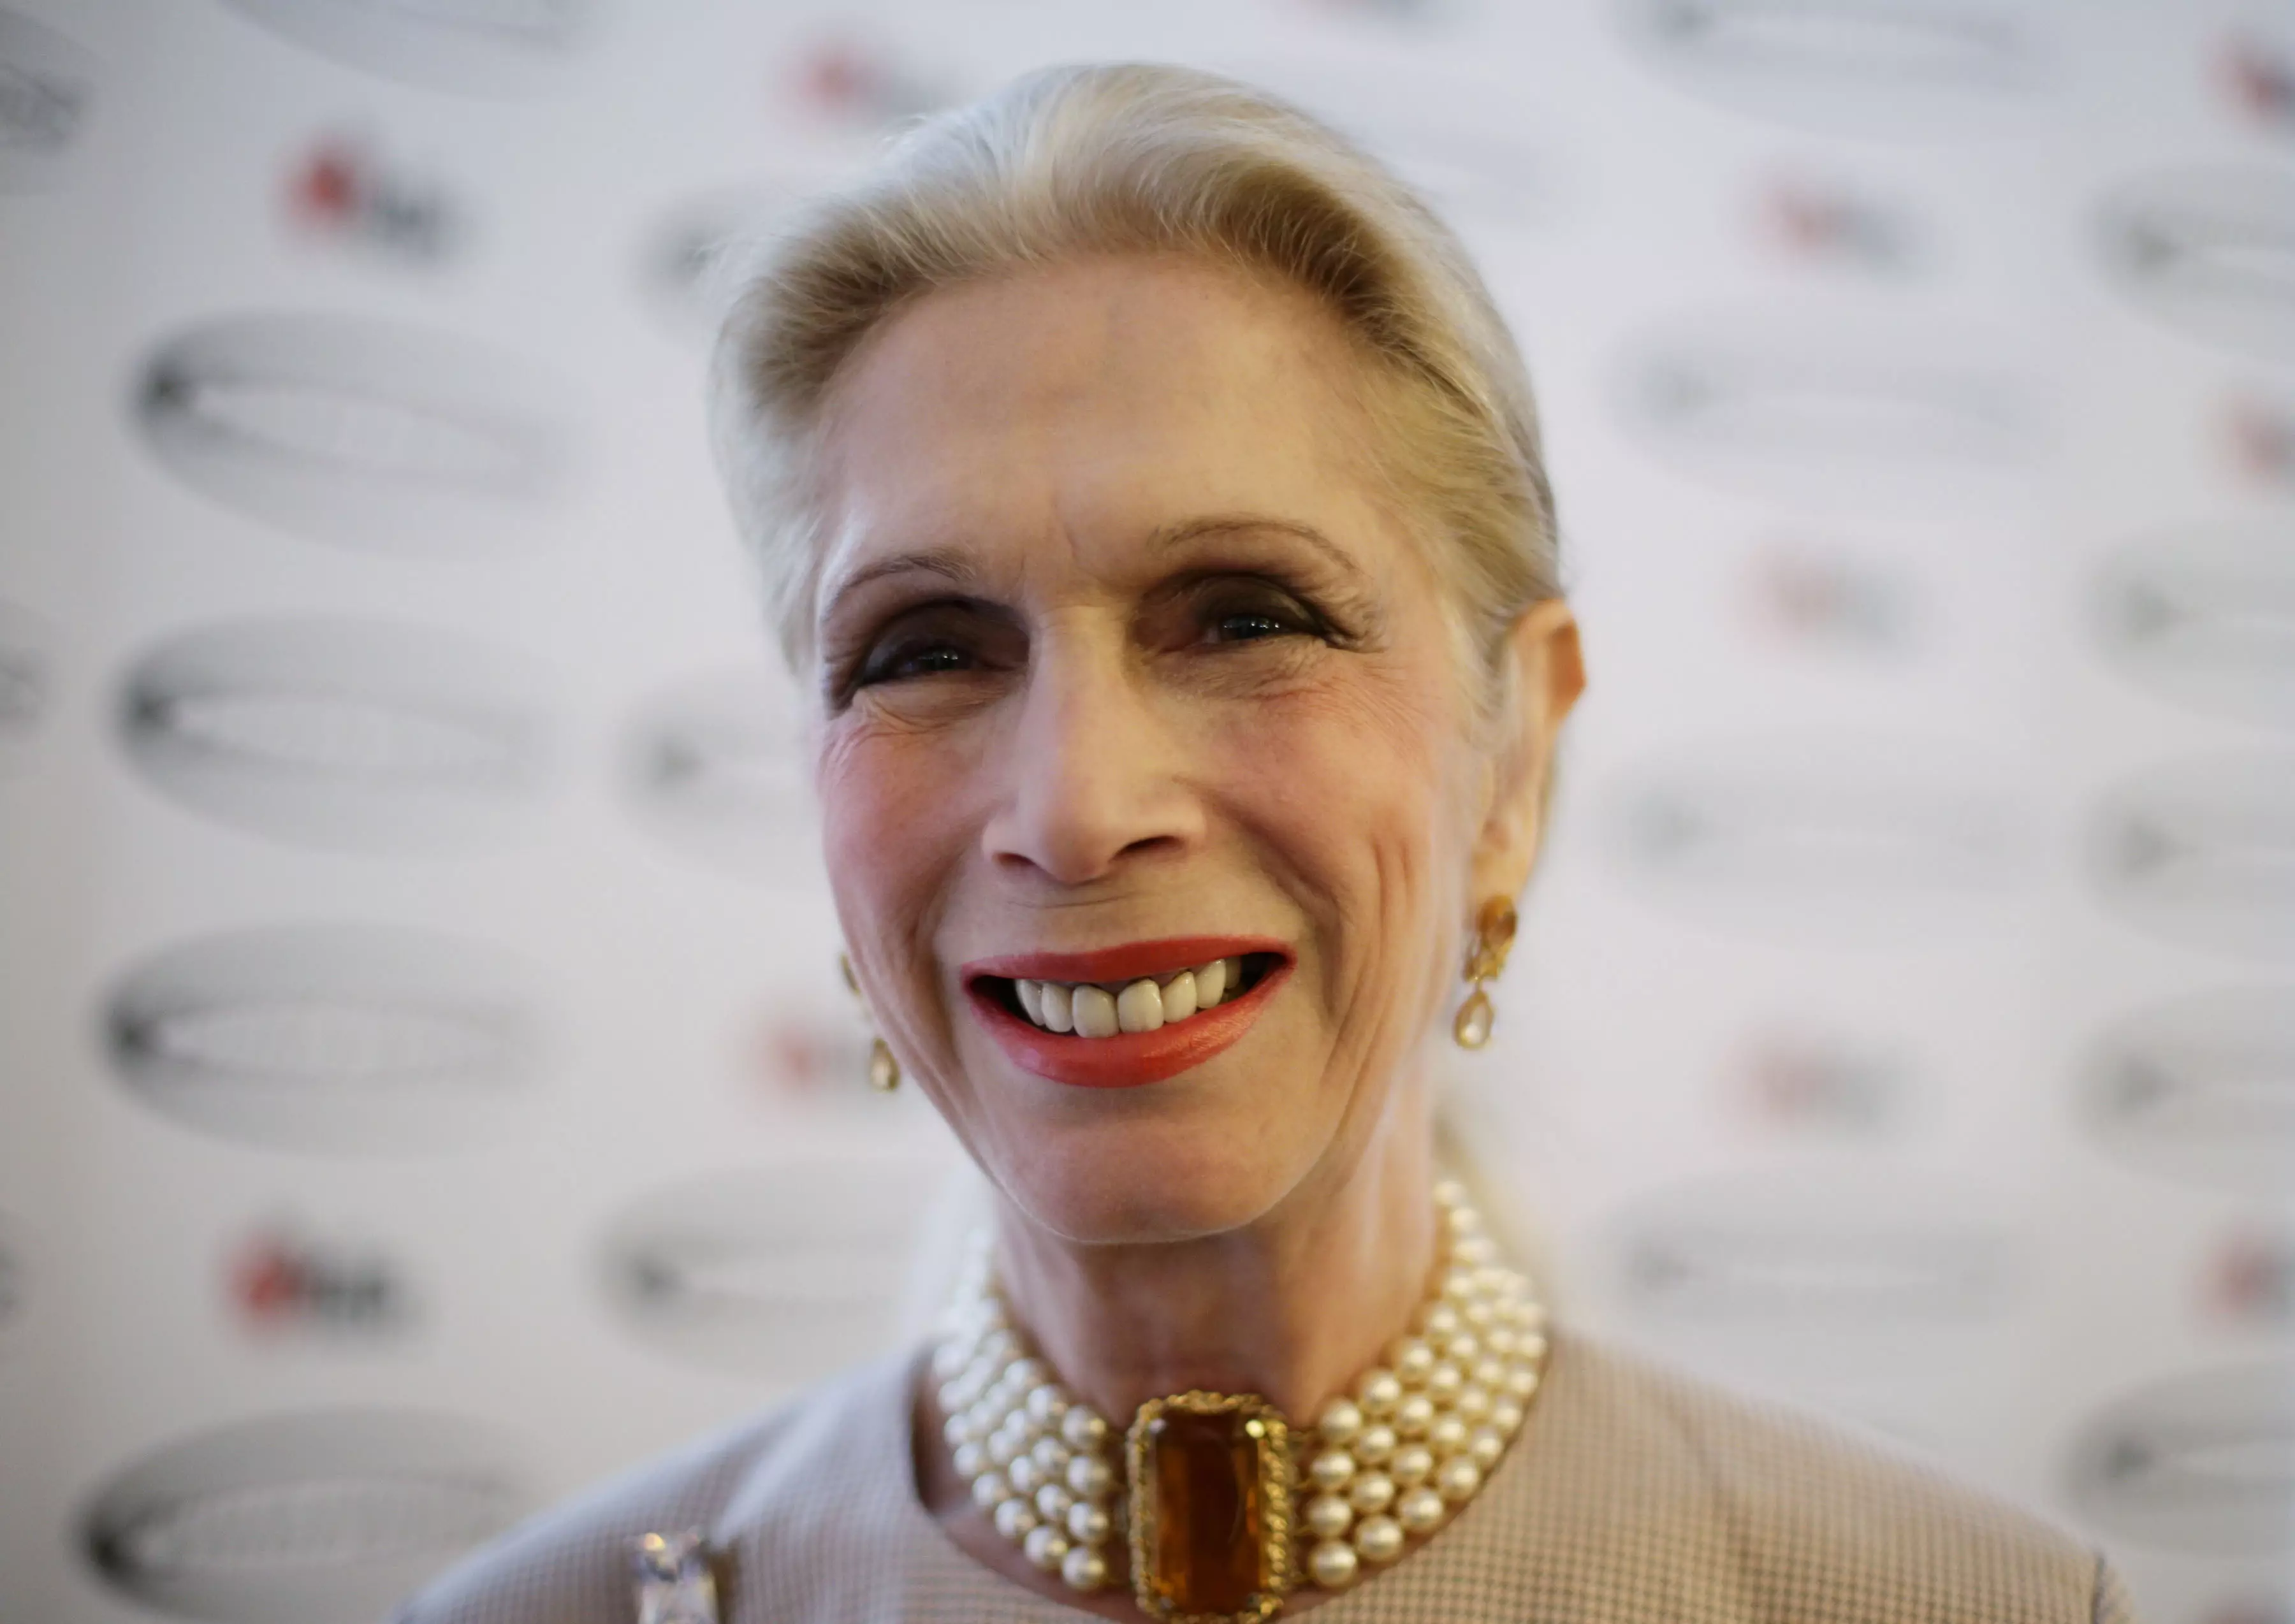 Lady Colin Campbell has claimed that soliciting prostitution from minors 'is not the same as paedophilia'.